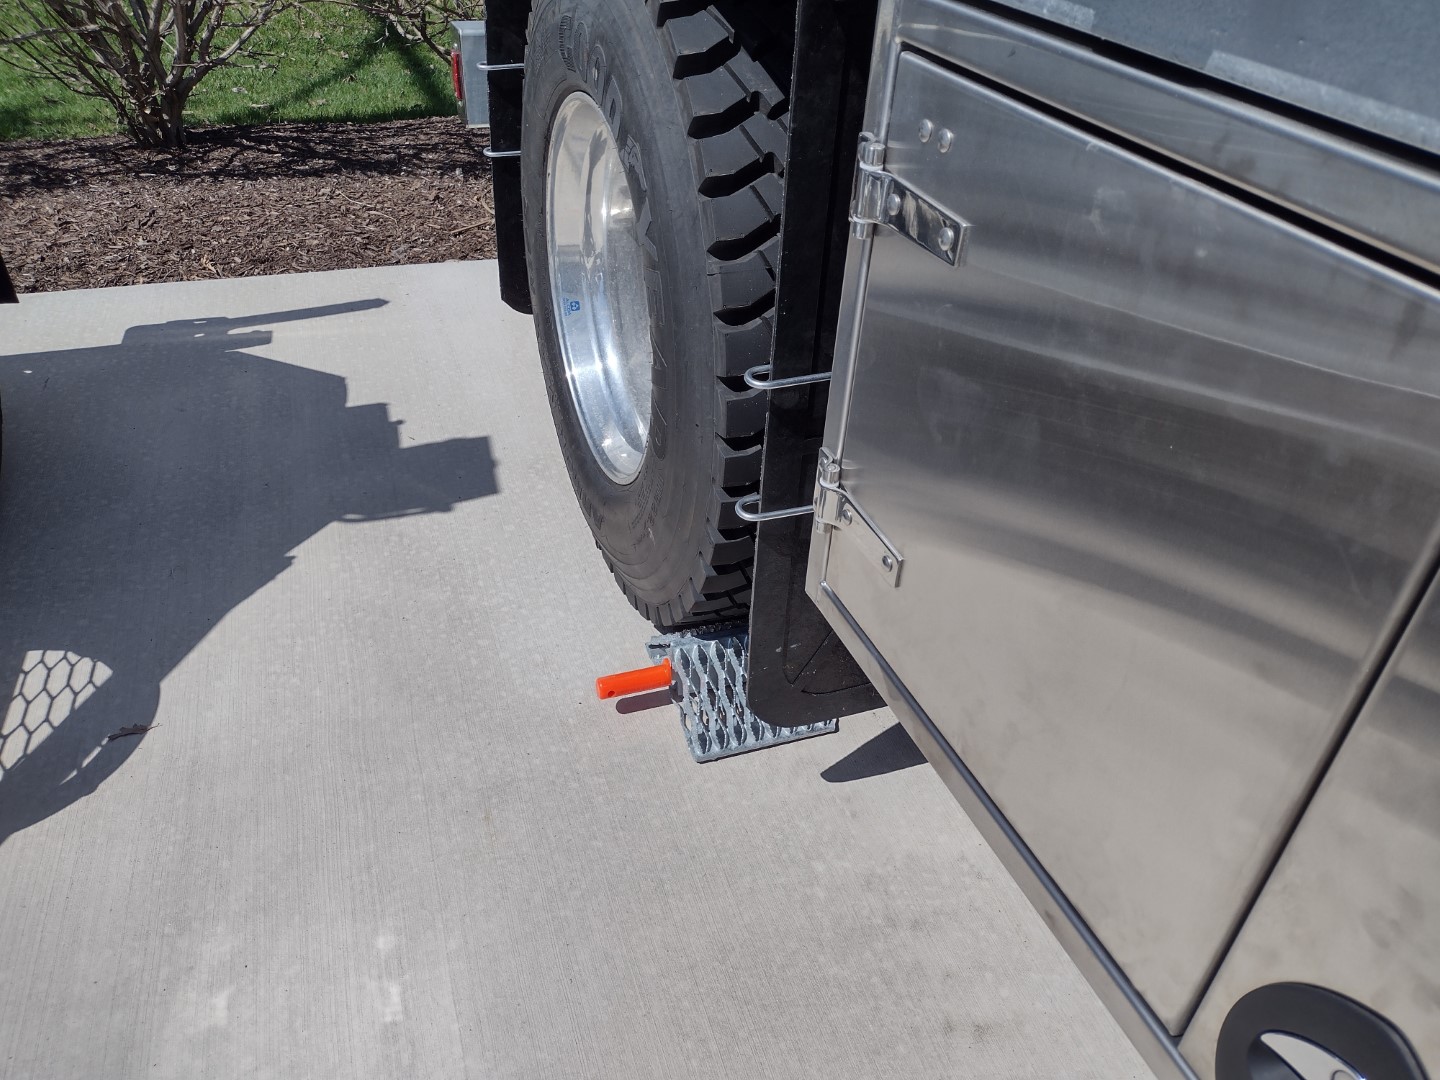 One All-Weather Wheel Chock with steel grip strut surfaces in position on the ground against the drive tire of a truck. Only part of the service body, the wheel and the wheel chock are visible. The All-Weather Wheel Chock has a natural galvanized finish and includes an orange urethane grip handle.